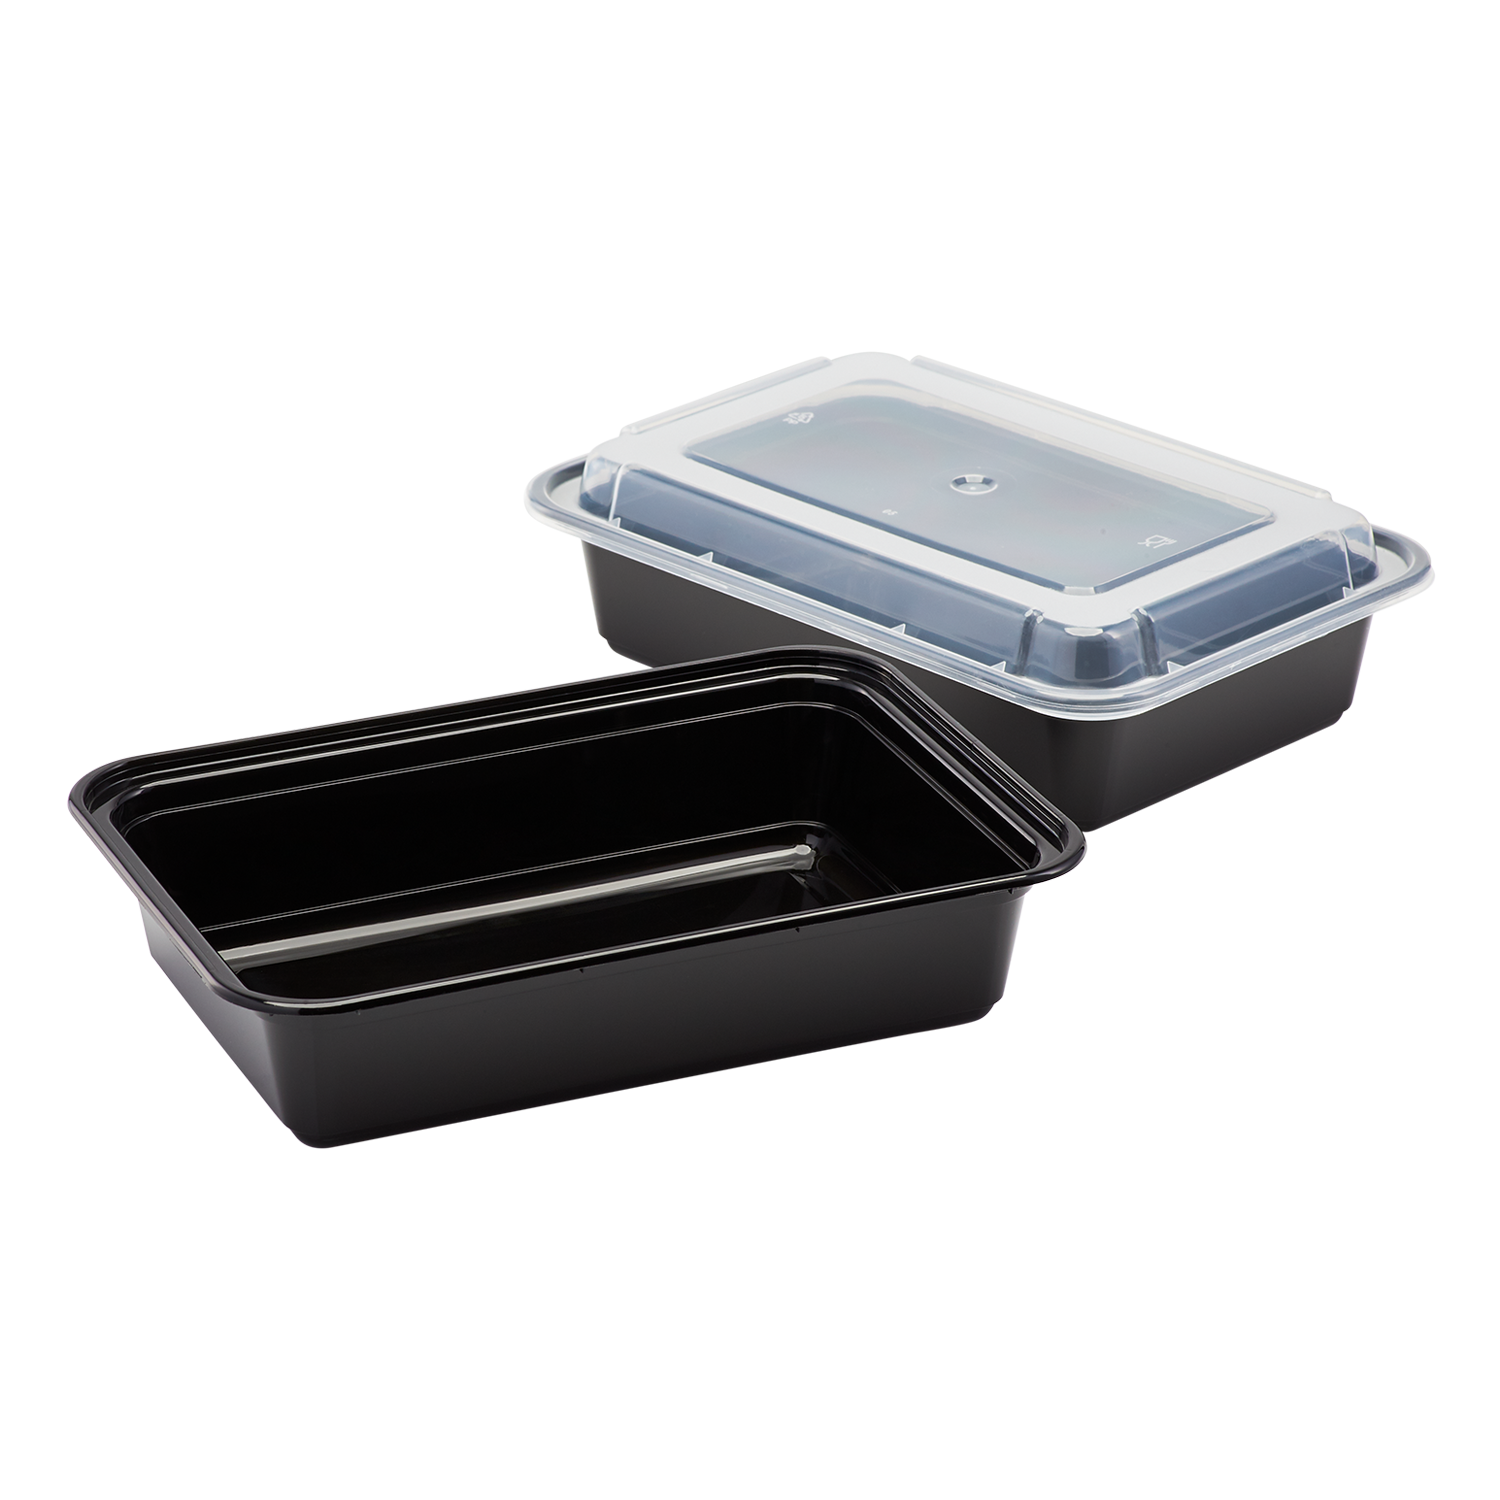 Product categories Bowls & Food Containers : MetroBagLLC